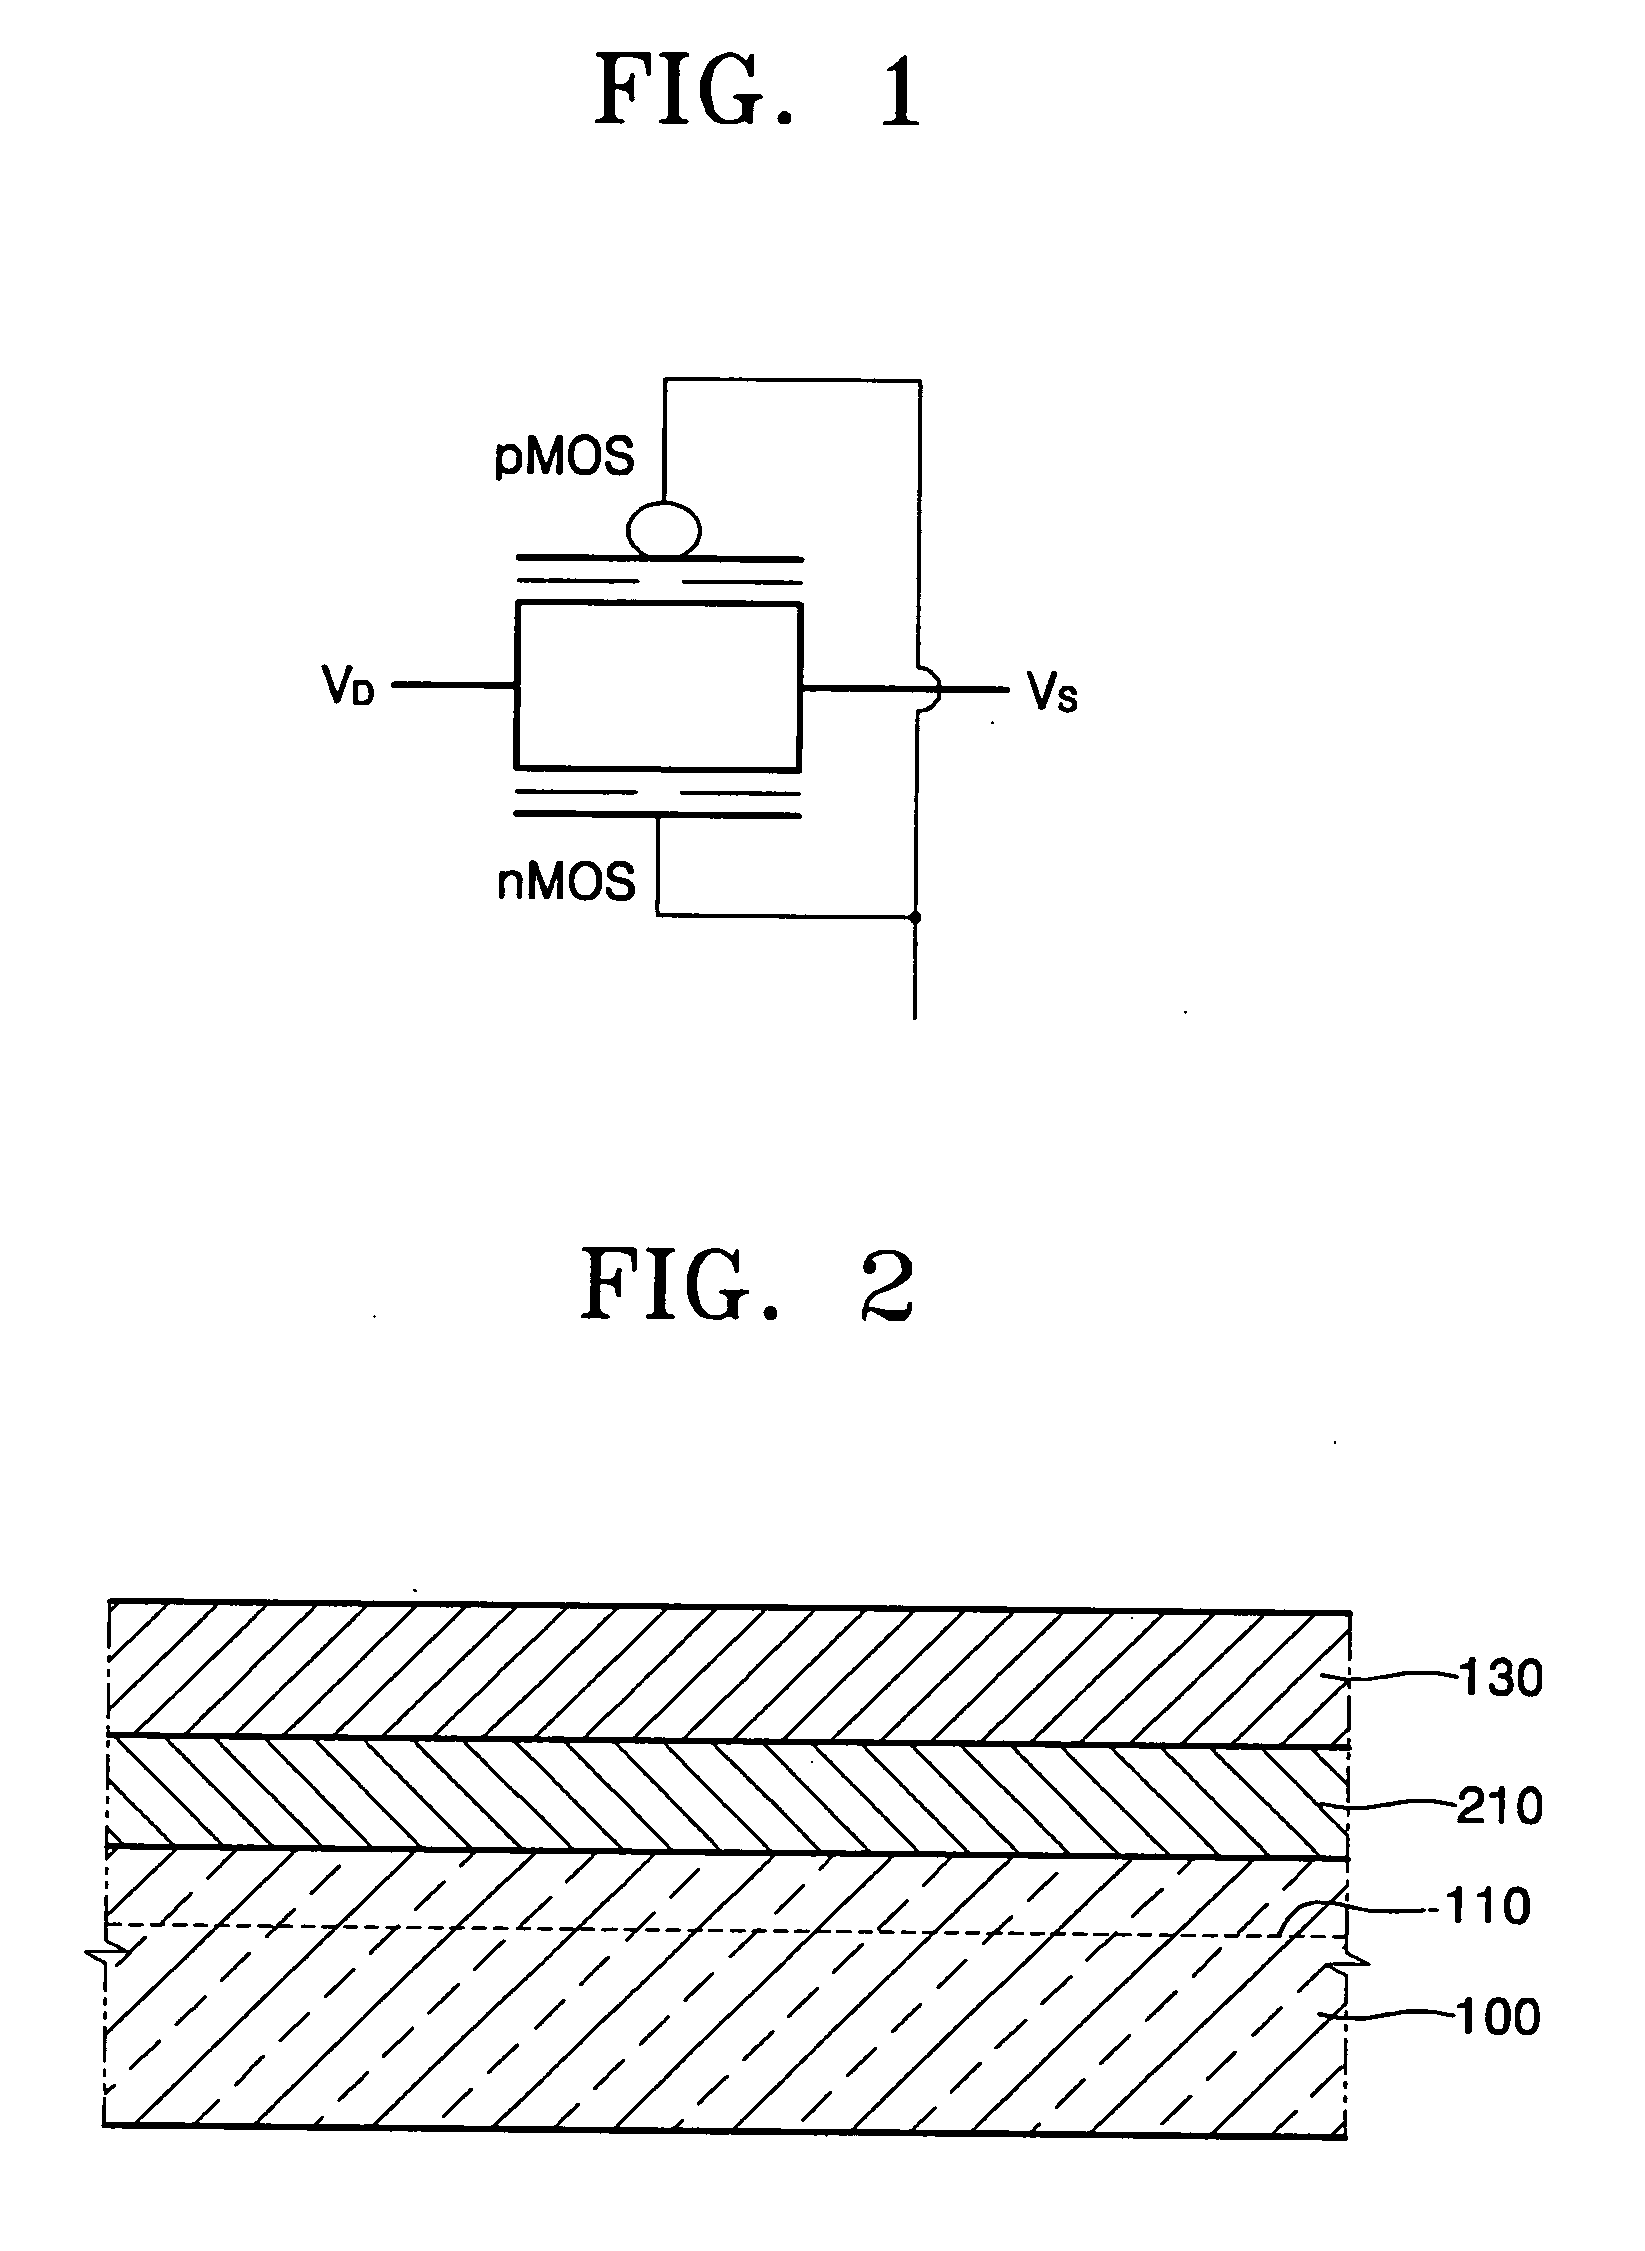 Multi bits flash memory device and method of operating the same